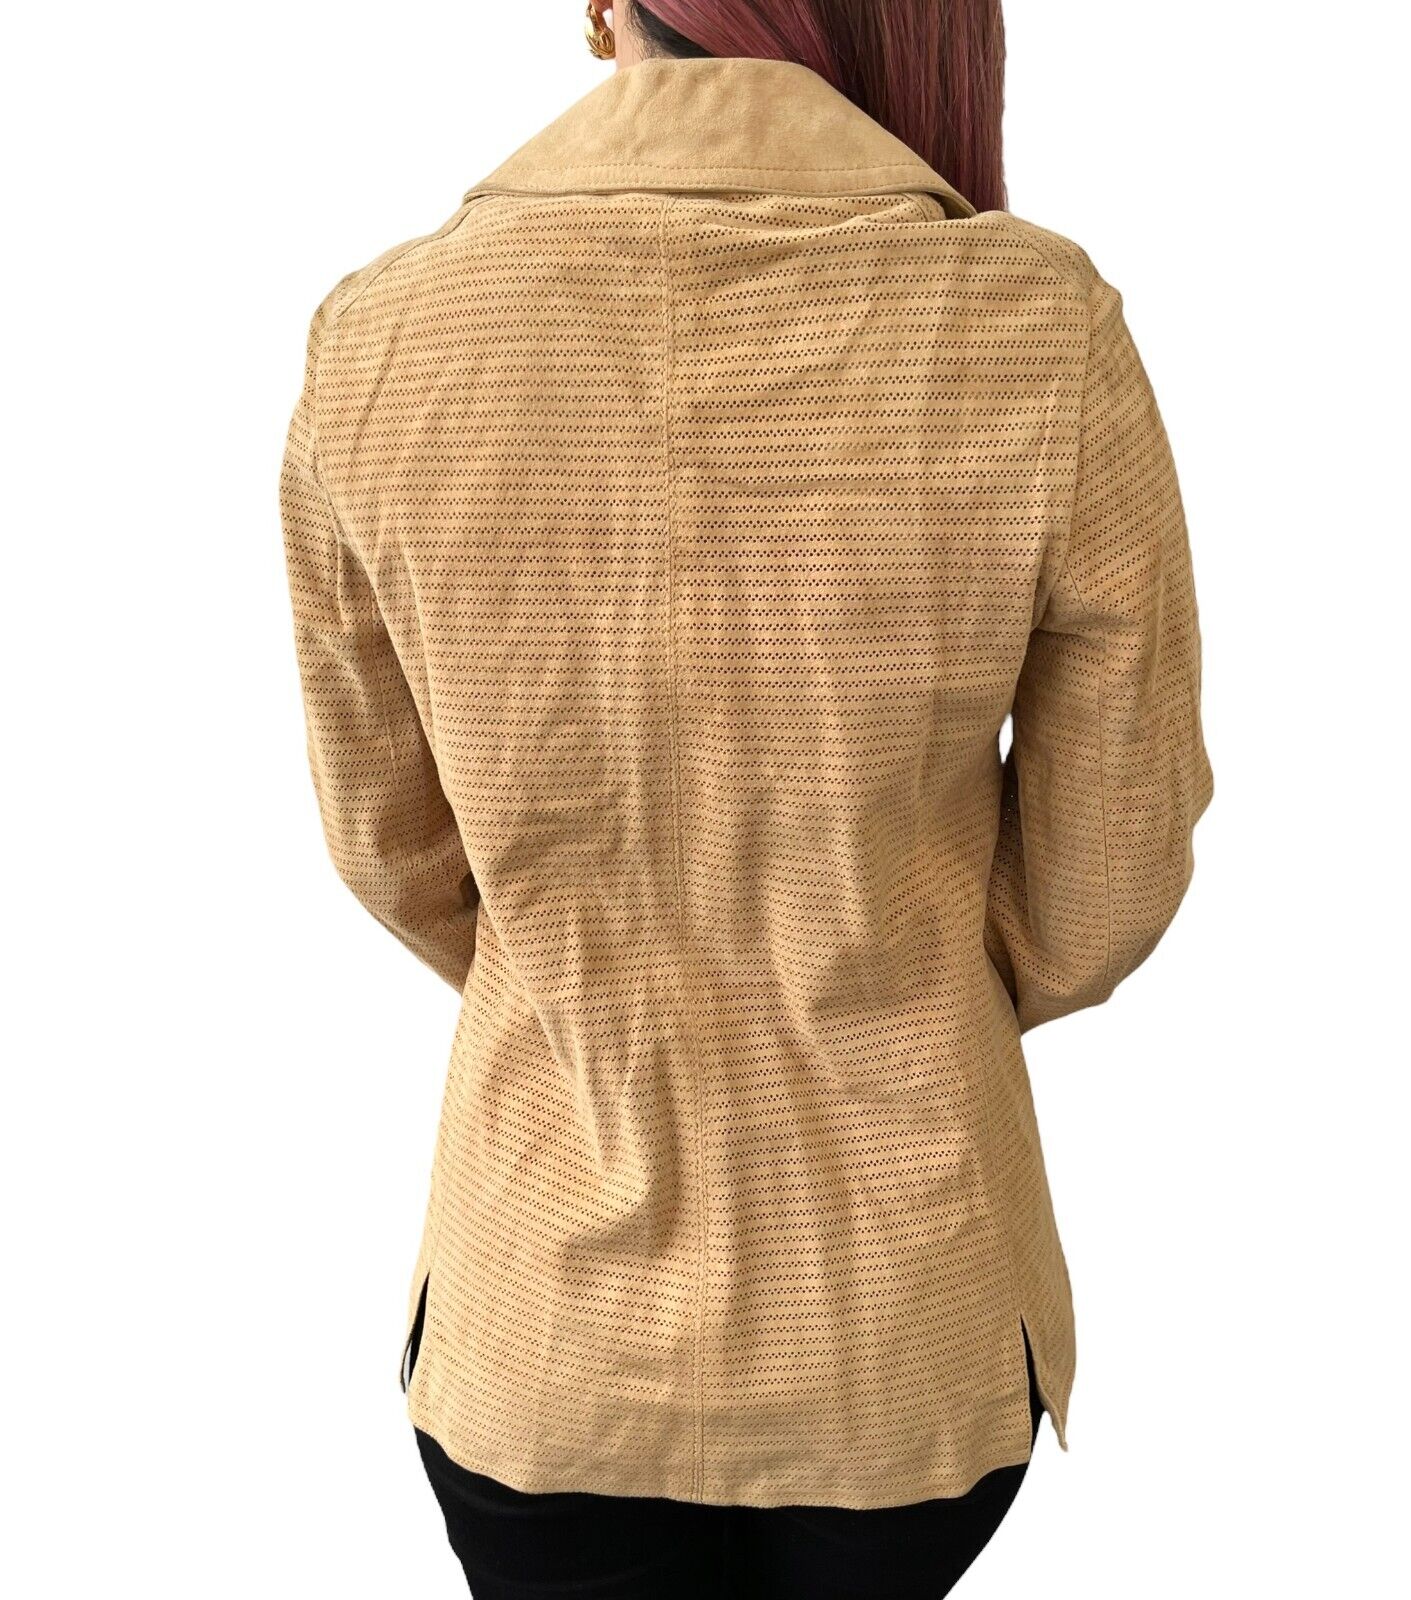 CELINE Vintage Punching Shirt Top #40 Snap Button Light Brown Suede Rank AB